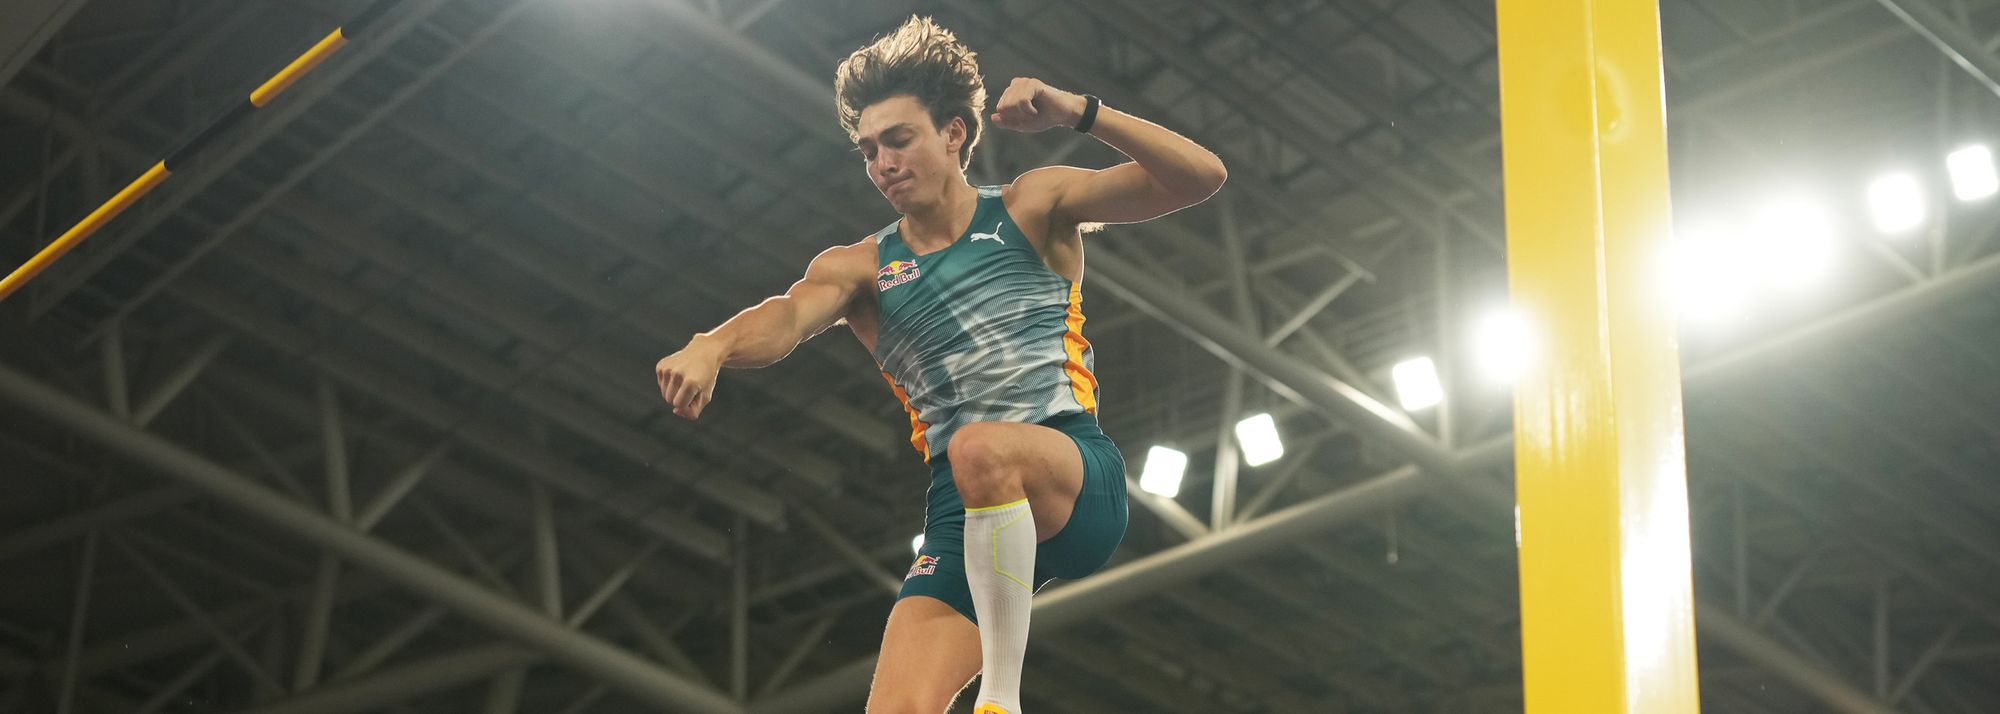 One week on from his world record-breaking performance at the opening Wanda Diamond League meeting of the season in Xiamen, Mondo Duplantis will be among the athletes in action when competition continues in Suzhou